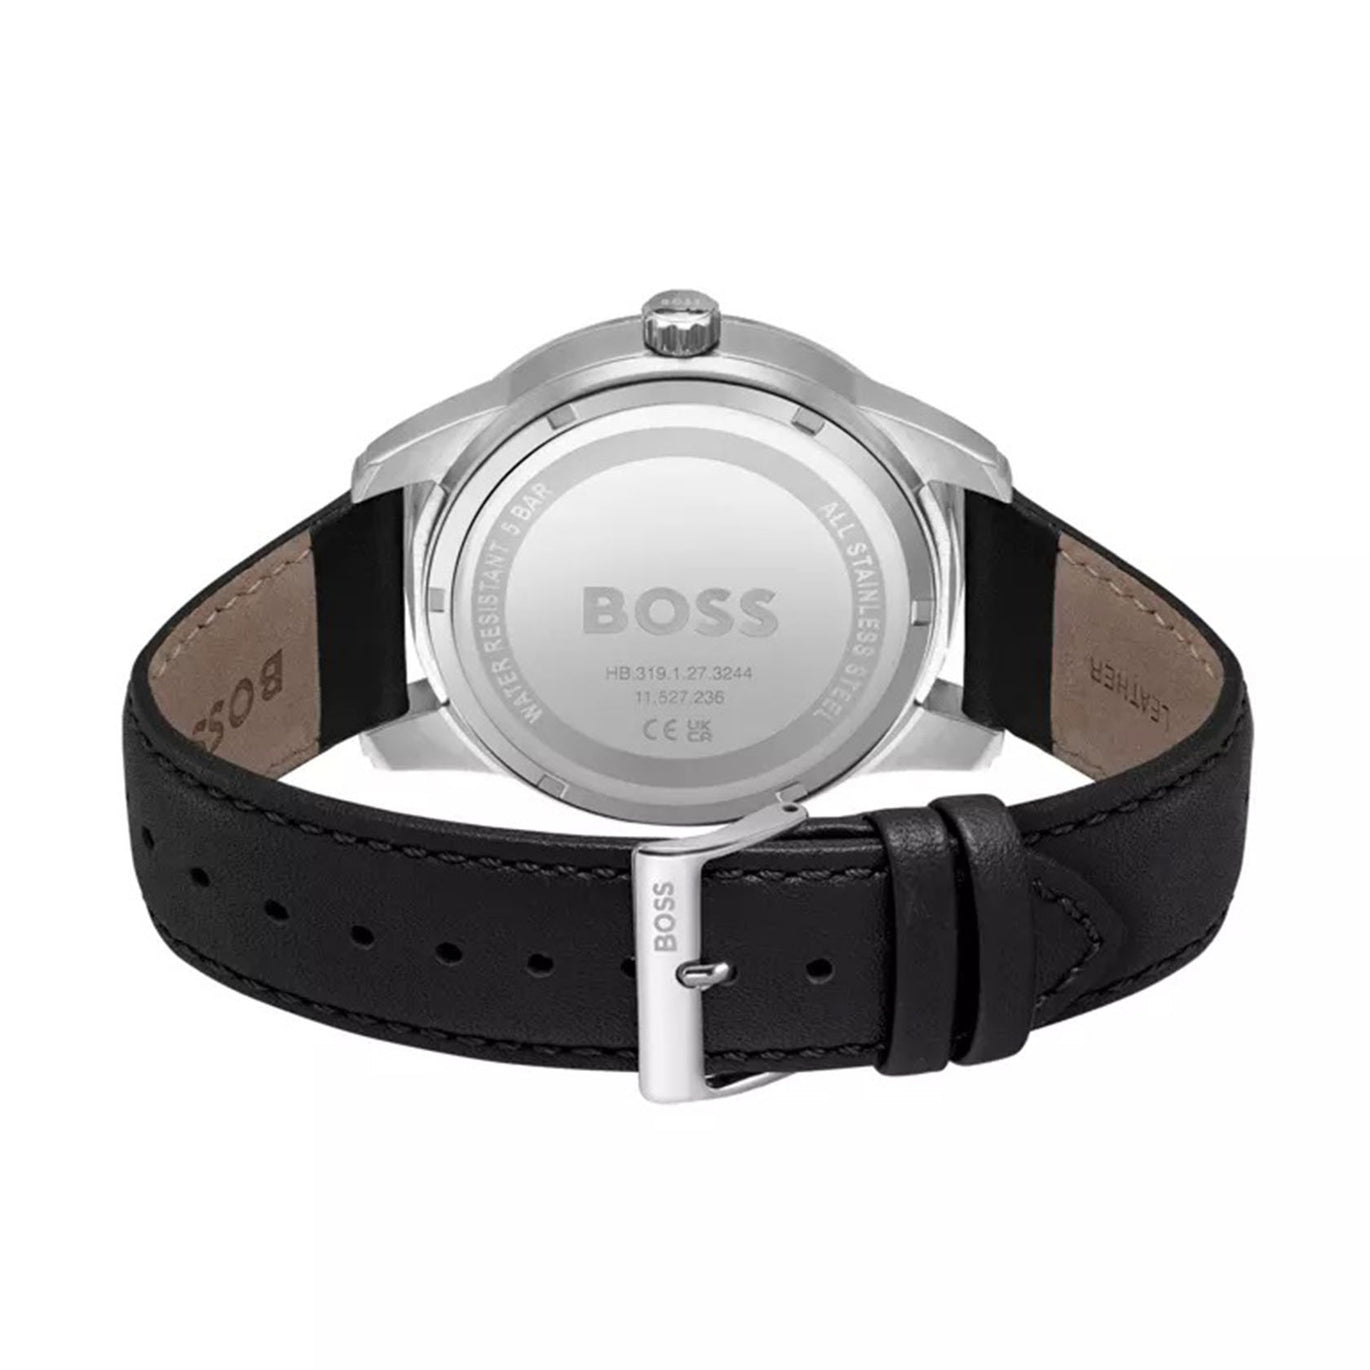 Boss Men's Sophio Chronograph Black Dial with Leather Strap Watch